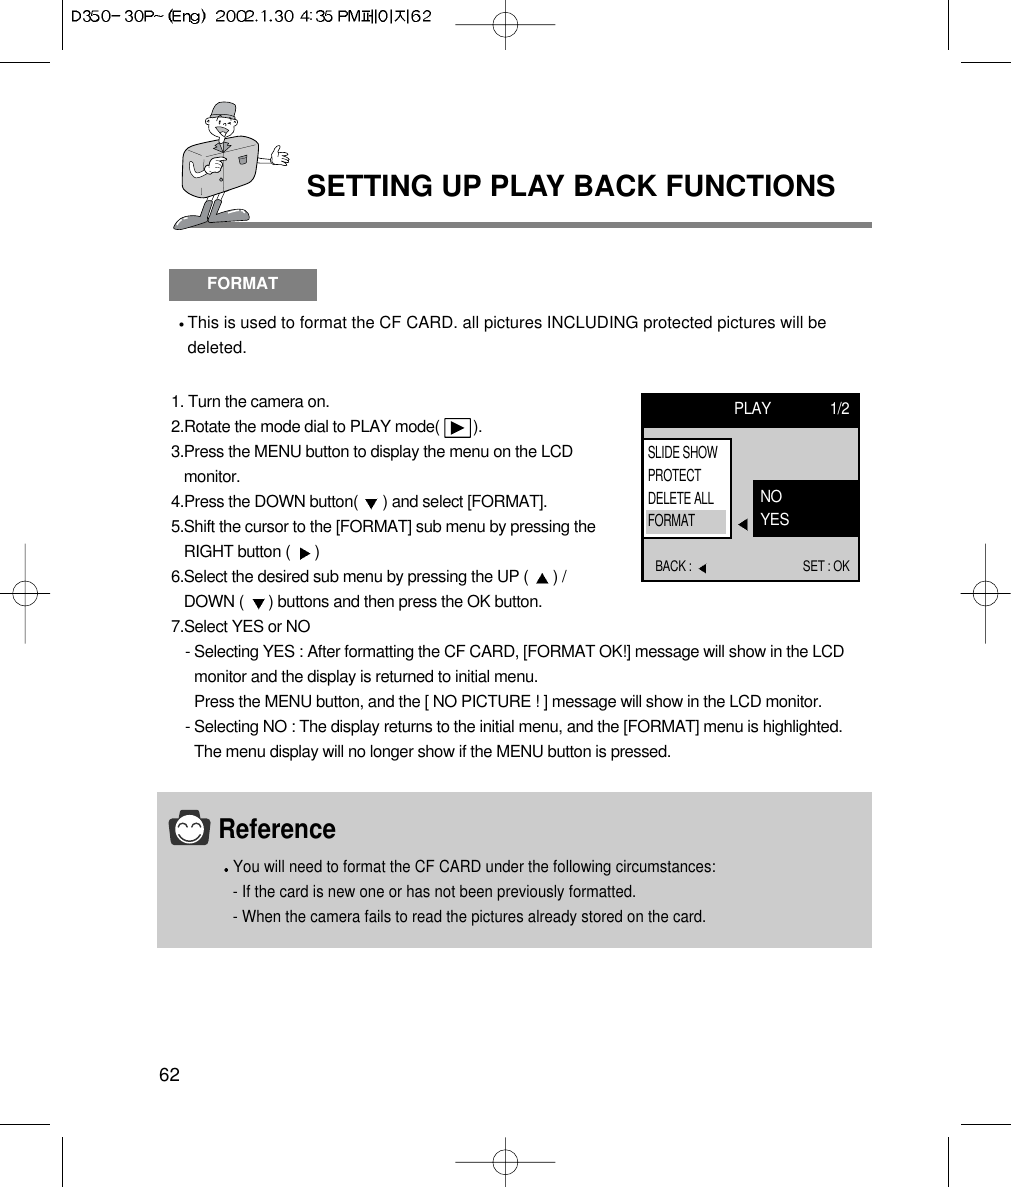 62SETTING UP PLAY BACK FUNCTIONSFORMATThis is used to format the CF CARD. all pictures INCLUDING protected pictures will bedeleted.1. Turn the camera on.2.Rotate the mode dial to PLAY mode(        ).3.Press the MENU button to display the menu on the LCDmonitor.4.Press the DOWN button(  ) and select [FORMAT].5.Shift the cursor to the [FORMAT] sub menu by pressing theRIGHT button (  ) 6.Select the desired sub menu by pressing the UP (  ) /DOWN (  ) buttons and then press the OK button.7.Select YES or NO- Selecting YES : After formatting the CF CARD, [FORMAT OK!] message will show in the LCDmonitor and the display is returned to initial menu.Press the MENU button, and the [ NO PICTURE ! ] message will show in the LCD monitor.- Selecting NO : The display returns to the initial menu, and the [FORMAT] menu is highlighted.The menu display will no longer show if the MENU button is pressed.PLAY 1/2BACK :  SET : OKNOYESSLIDE SHOWPROTECTDELETE ALLFORMATReferenceYou will need to format the CF CARD under the following circumstances:- If the card is new one or has not been previously formatted.- When the camera fails to read the pictures already stored on the card.